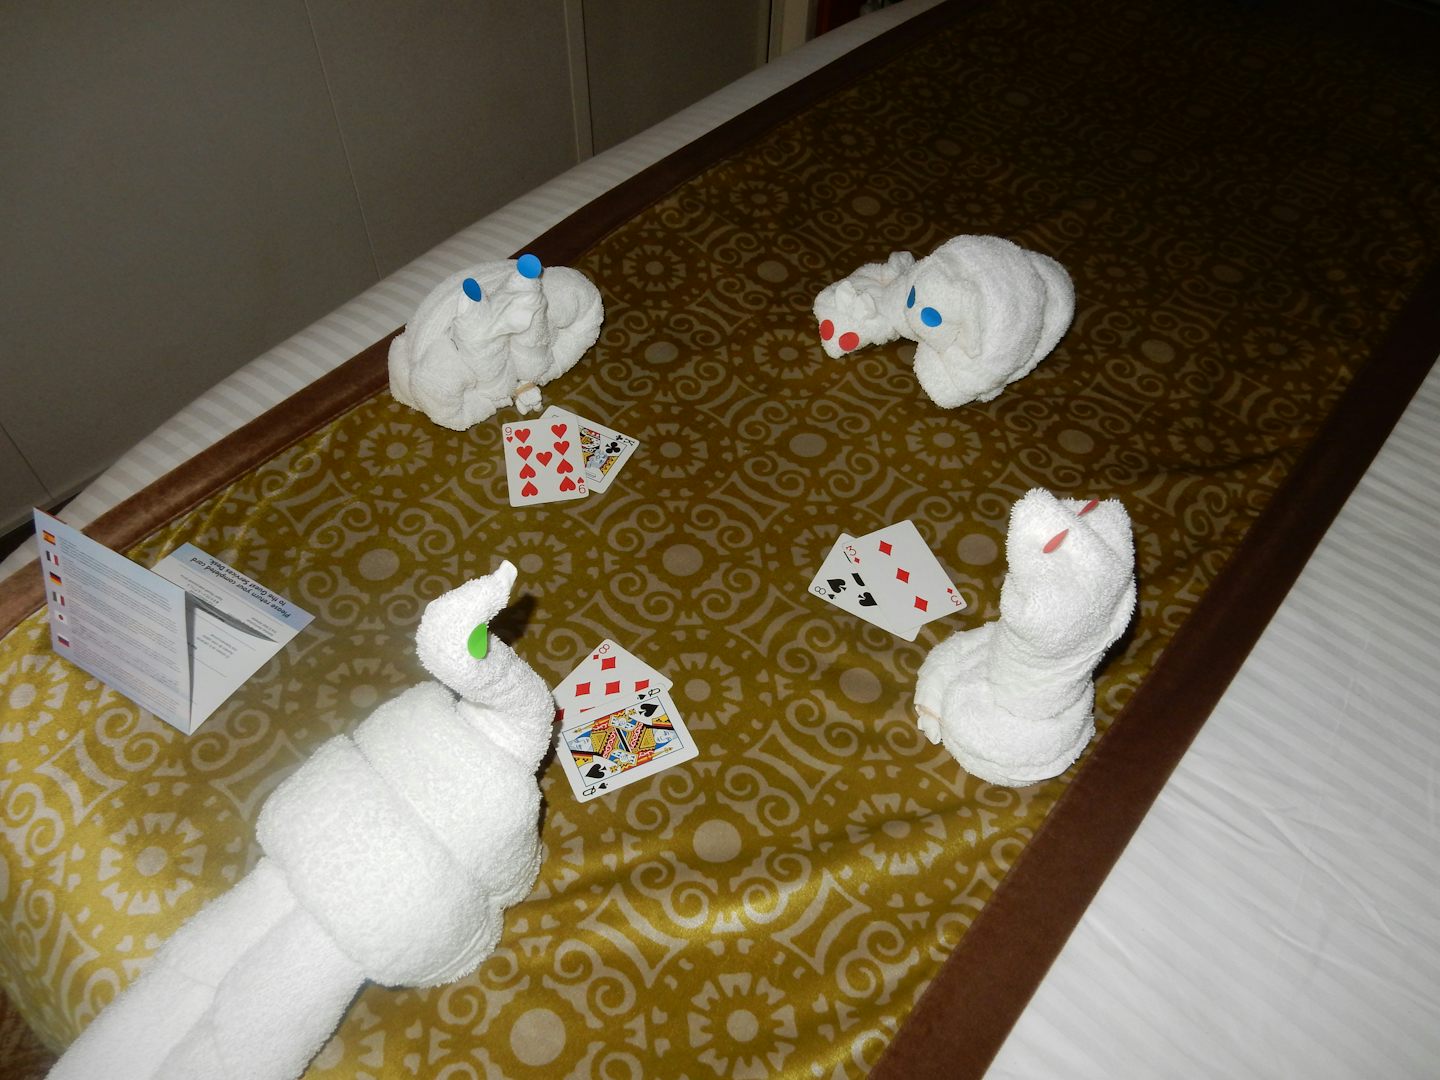 Towel animals playing cards on the bed